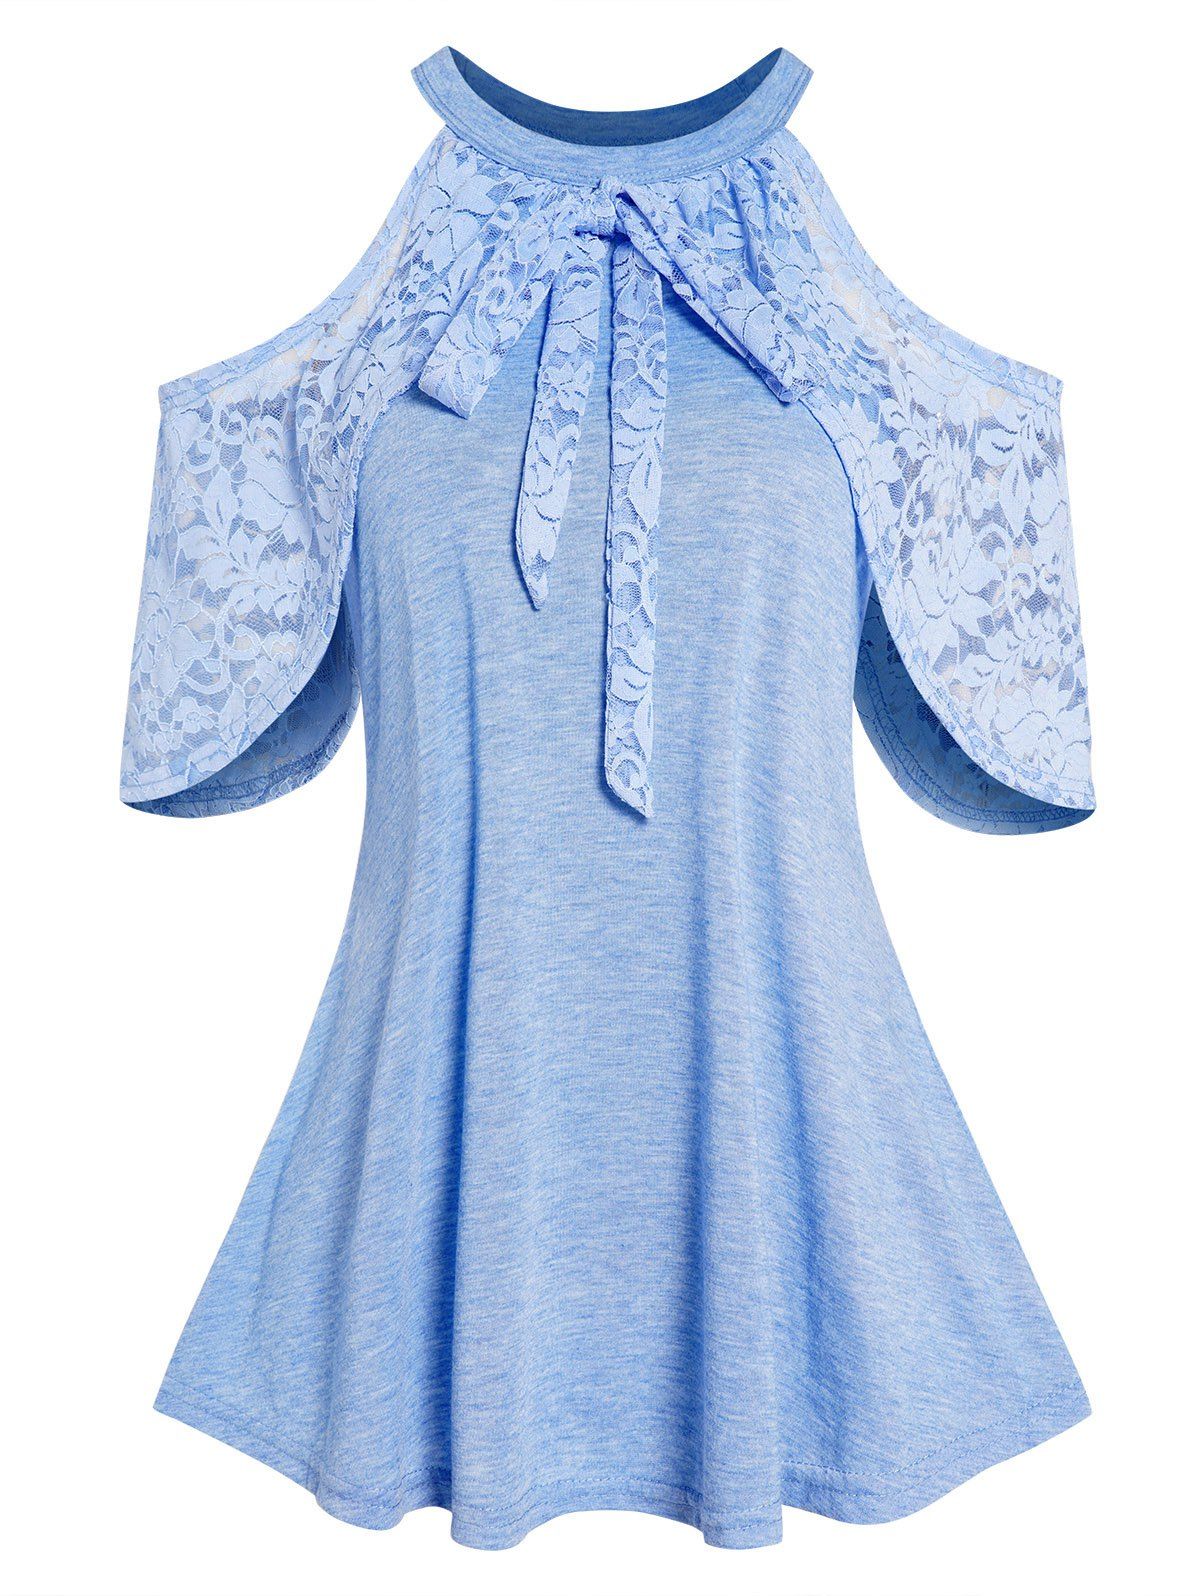 Cold Shoulder Lace Bowknot Top Short Sleeve Round Neck Casual Top - LIGHT BLUE L